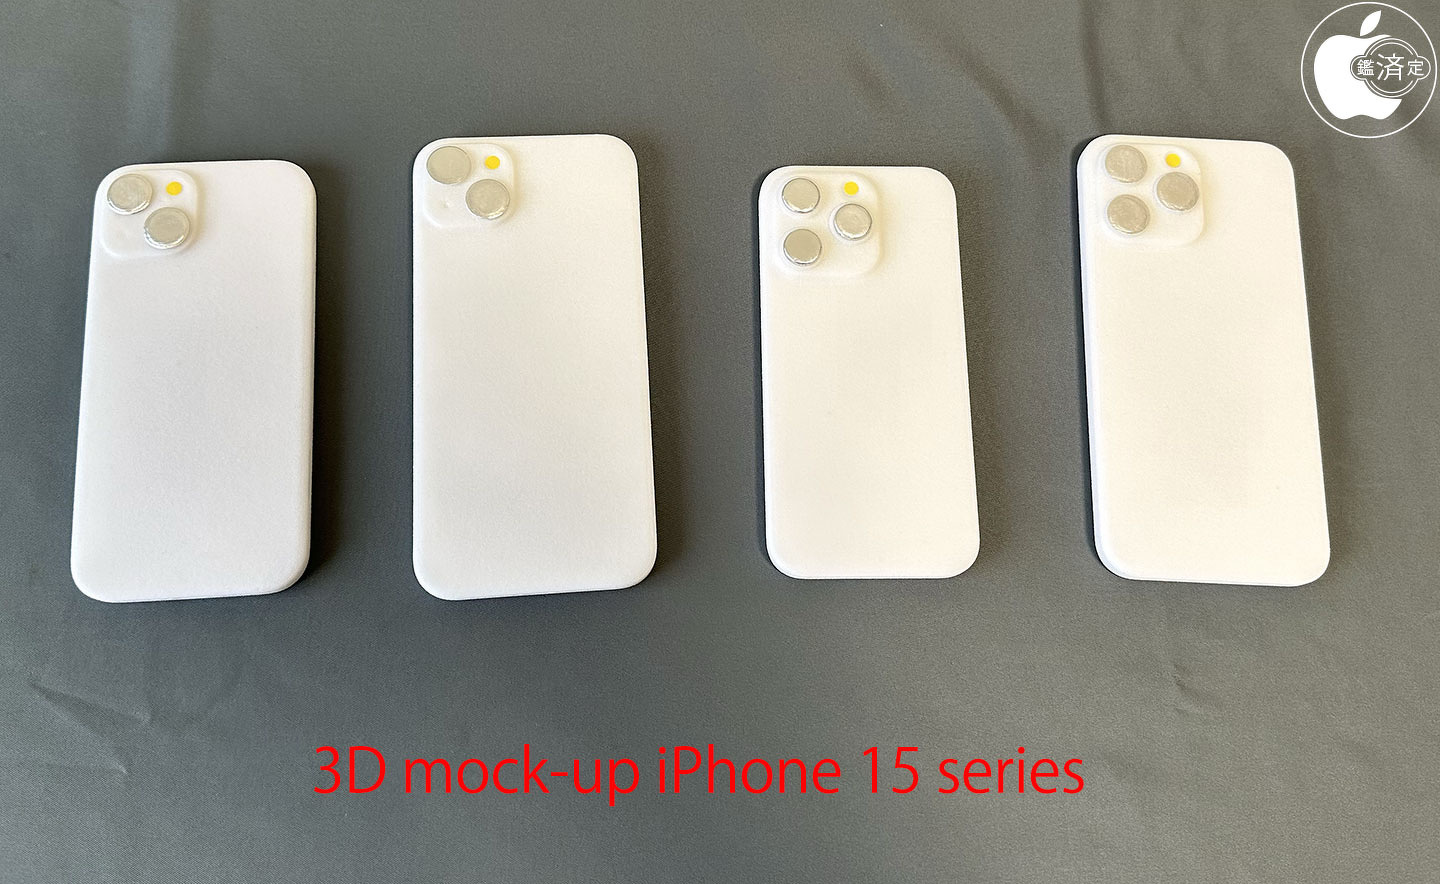 3D-Printed iPhone 15 Models Used to Test iPhone 14 Case Compatibility